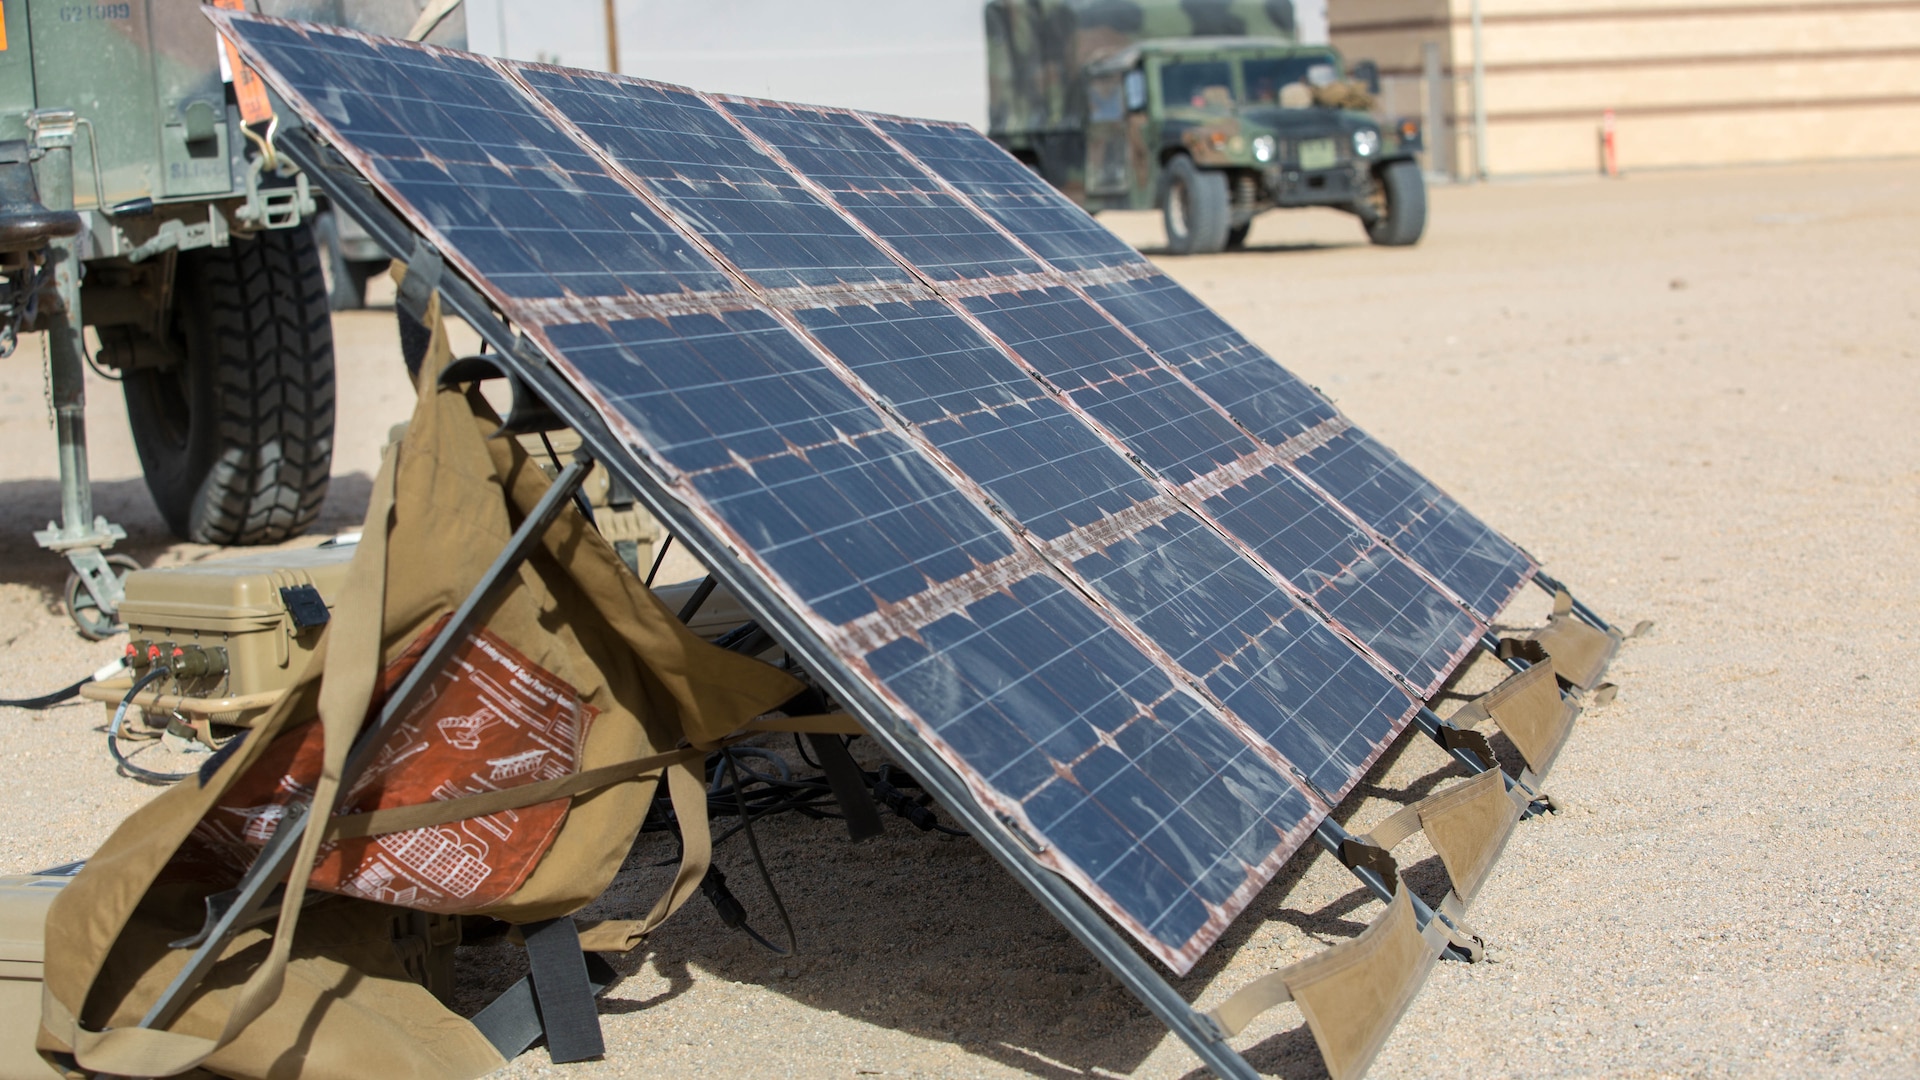 Marines with 3rd Battalion, 11th Marine Regiment, display the Ground Renewable Expeditionary Electronics Network System during the Energy Capability Exercise, in alignment with the Great Green Fleet initiative, at Camp Wilson aboard the Marine Corps Air Ground Combat Center, Twentynine Palms, California, Dec. 6, 2016. 